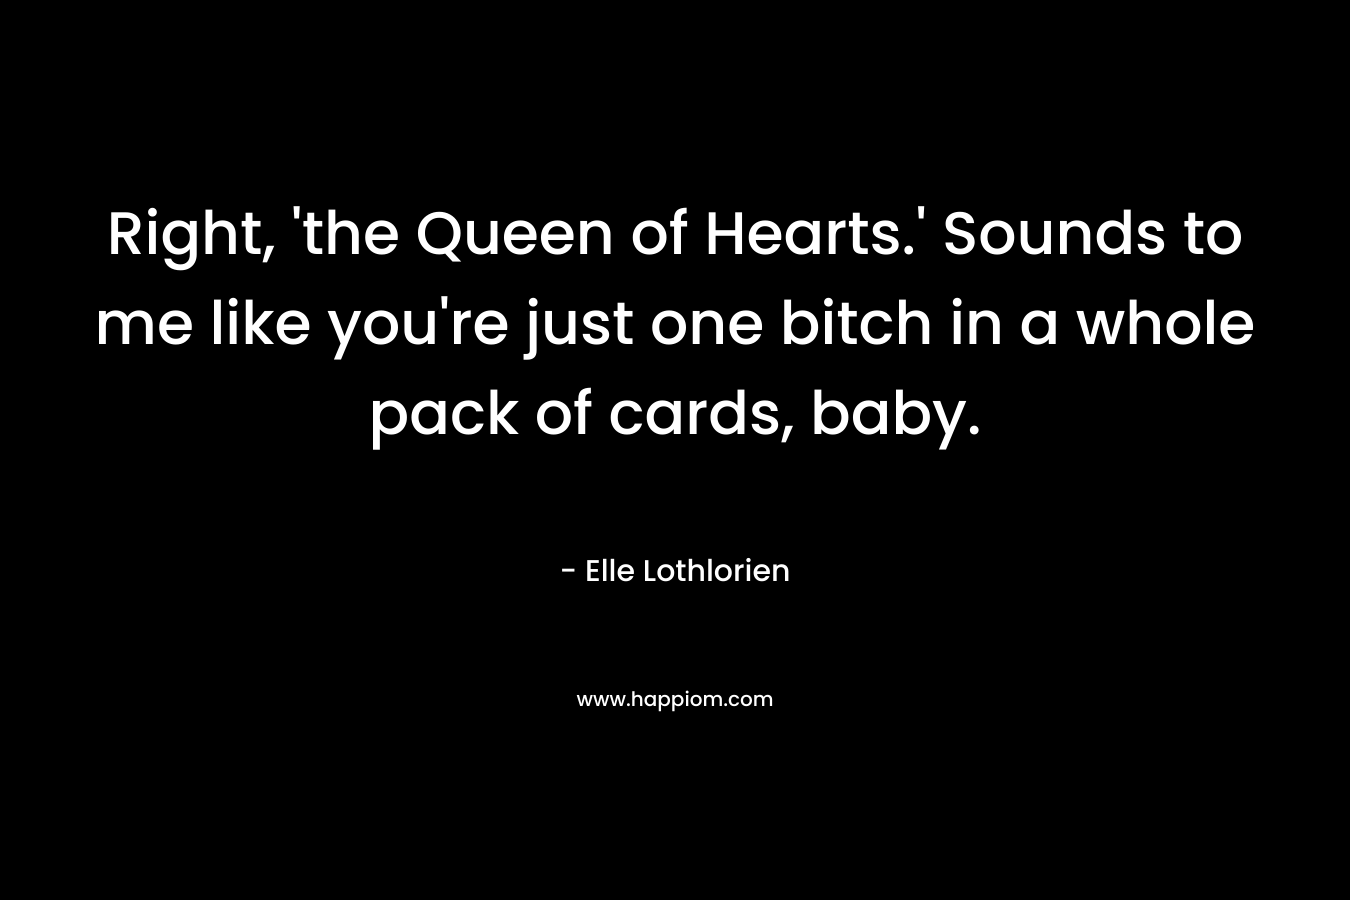 Right, 'the Queen of Hearts.' Sounds to me like you're just one bitch in a whole pack of cards, baby.